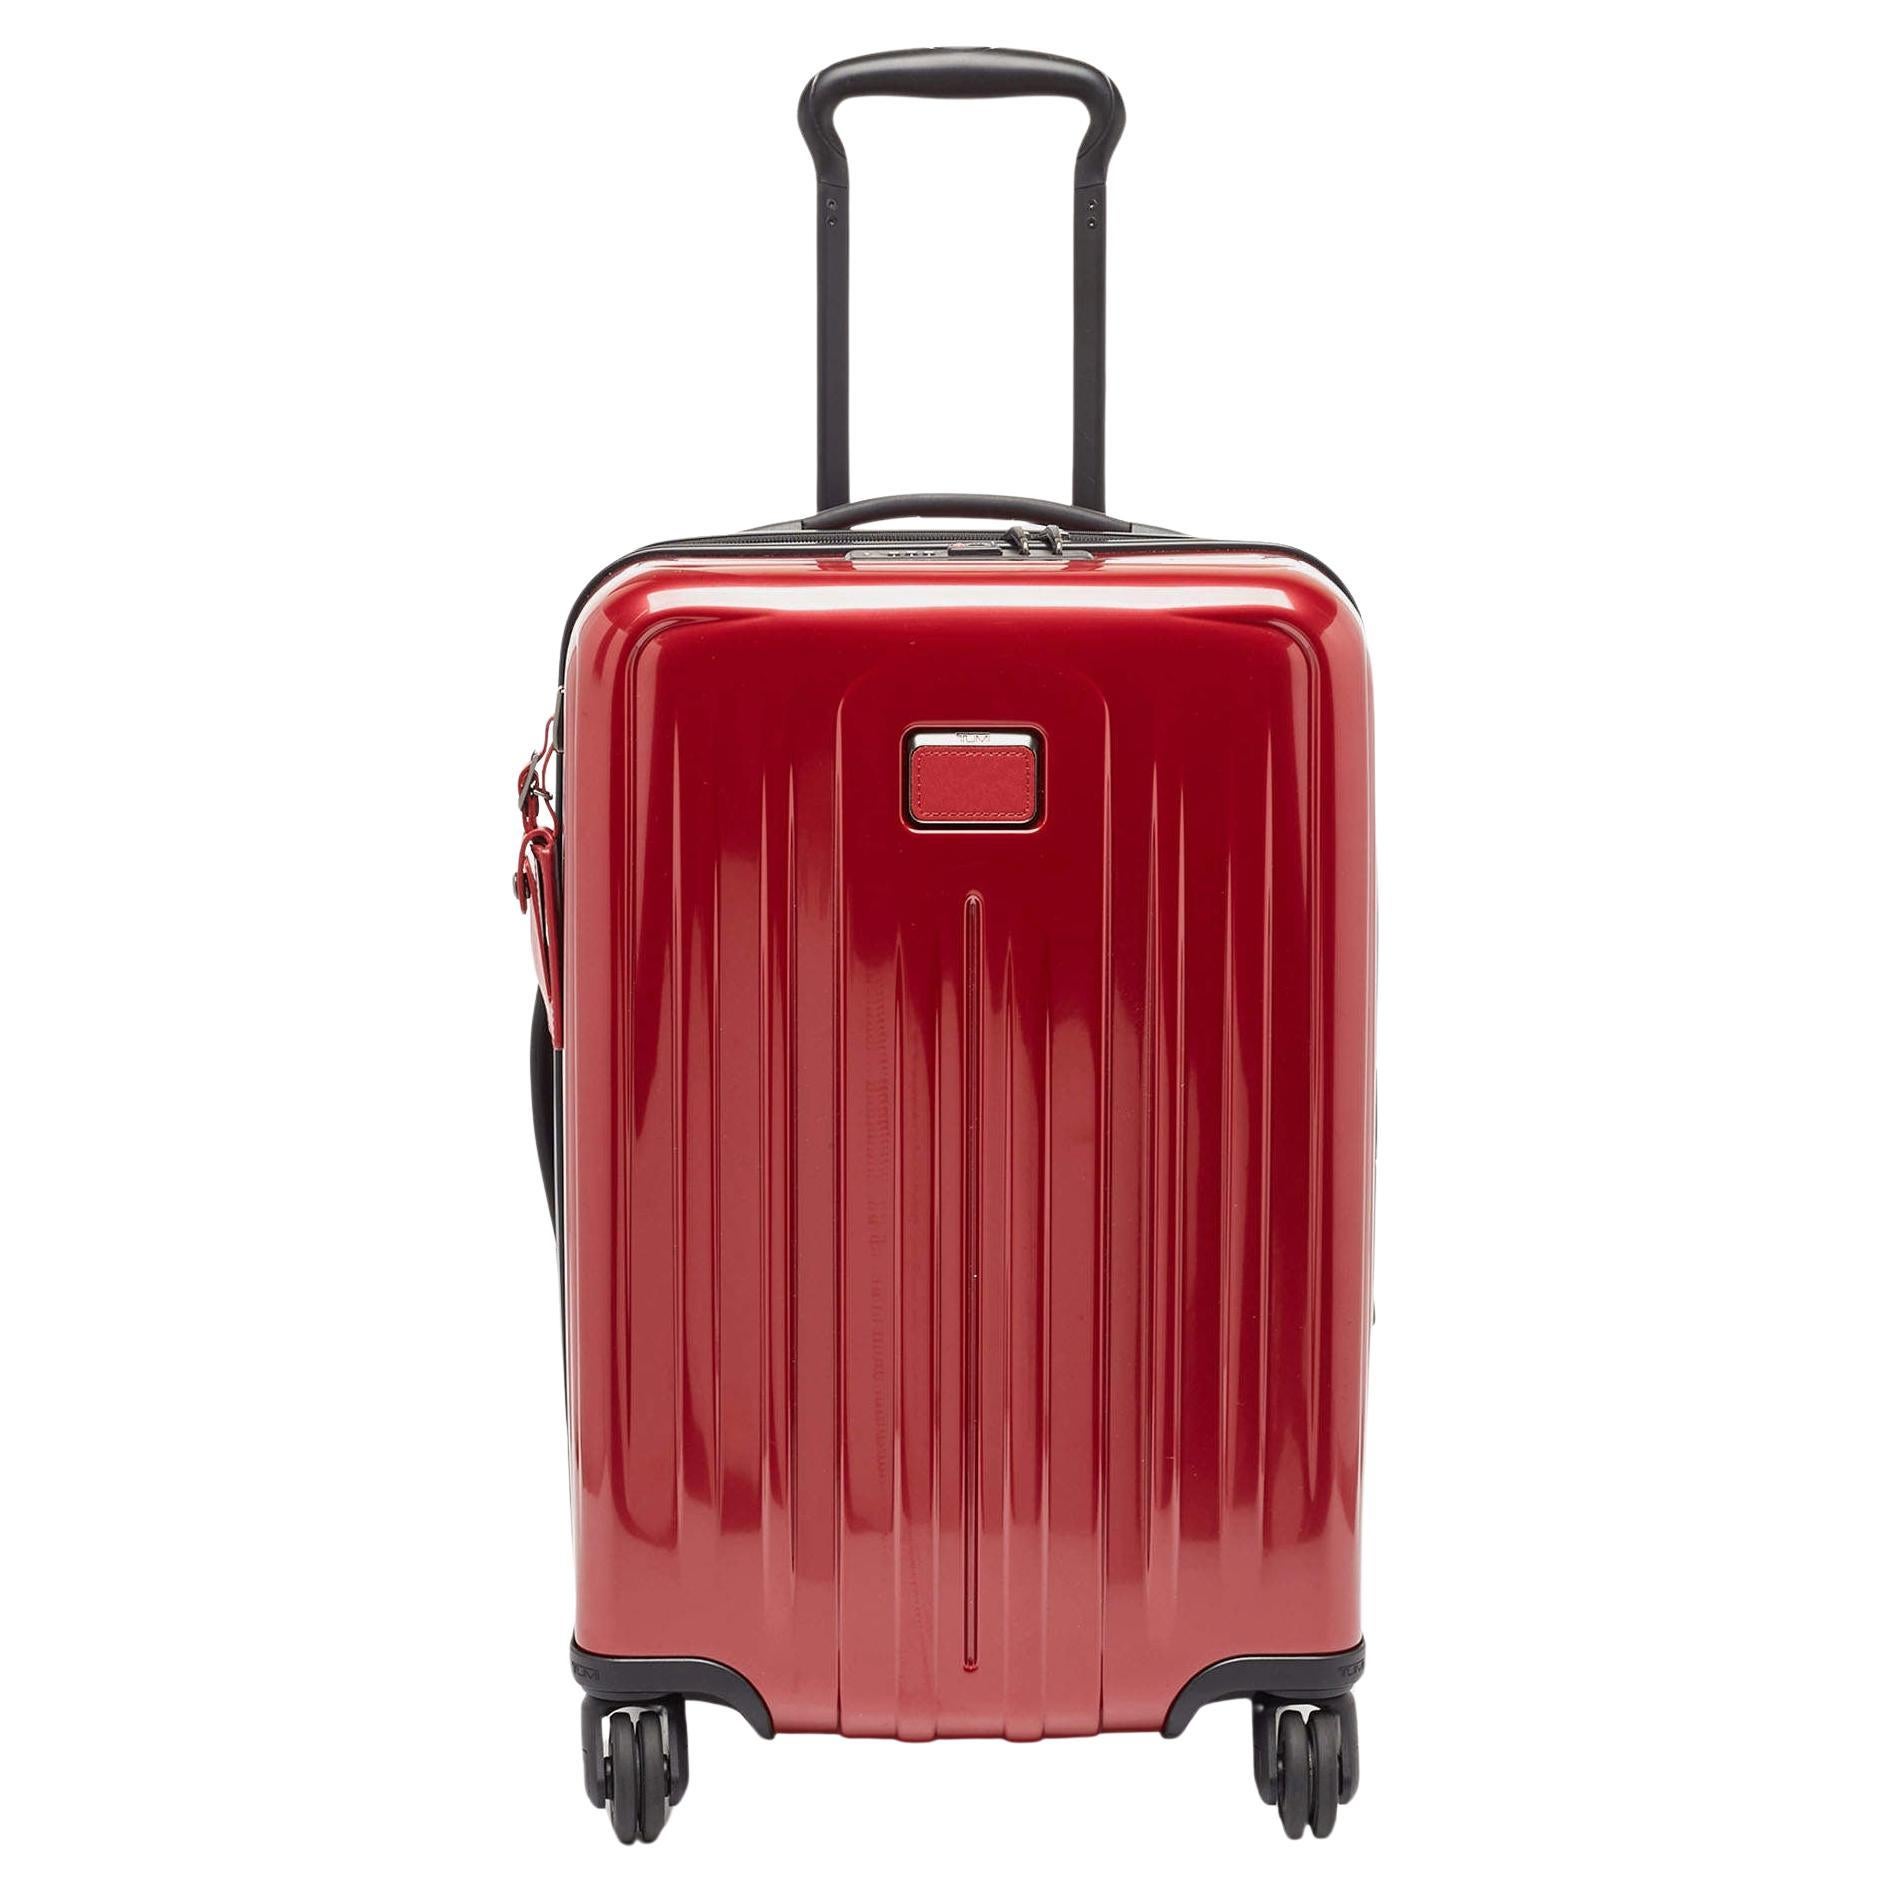 TUMI Red 4 Wheeled V4 International Expandable Carry On Luggage (Bagages à main extensibles à 4 roues) en vente